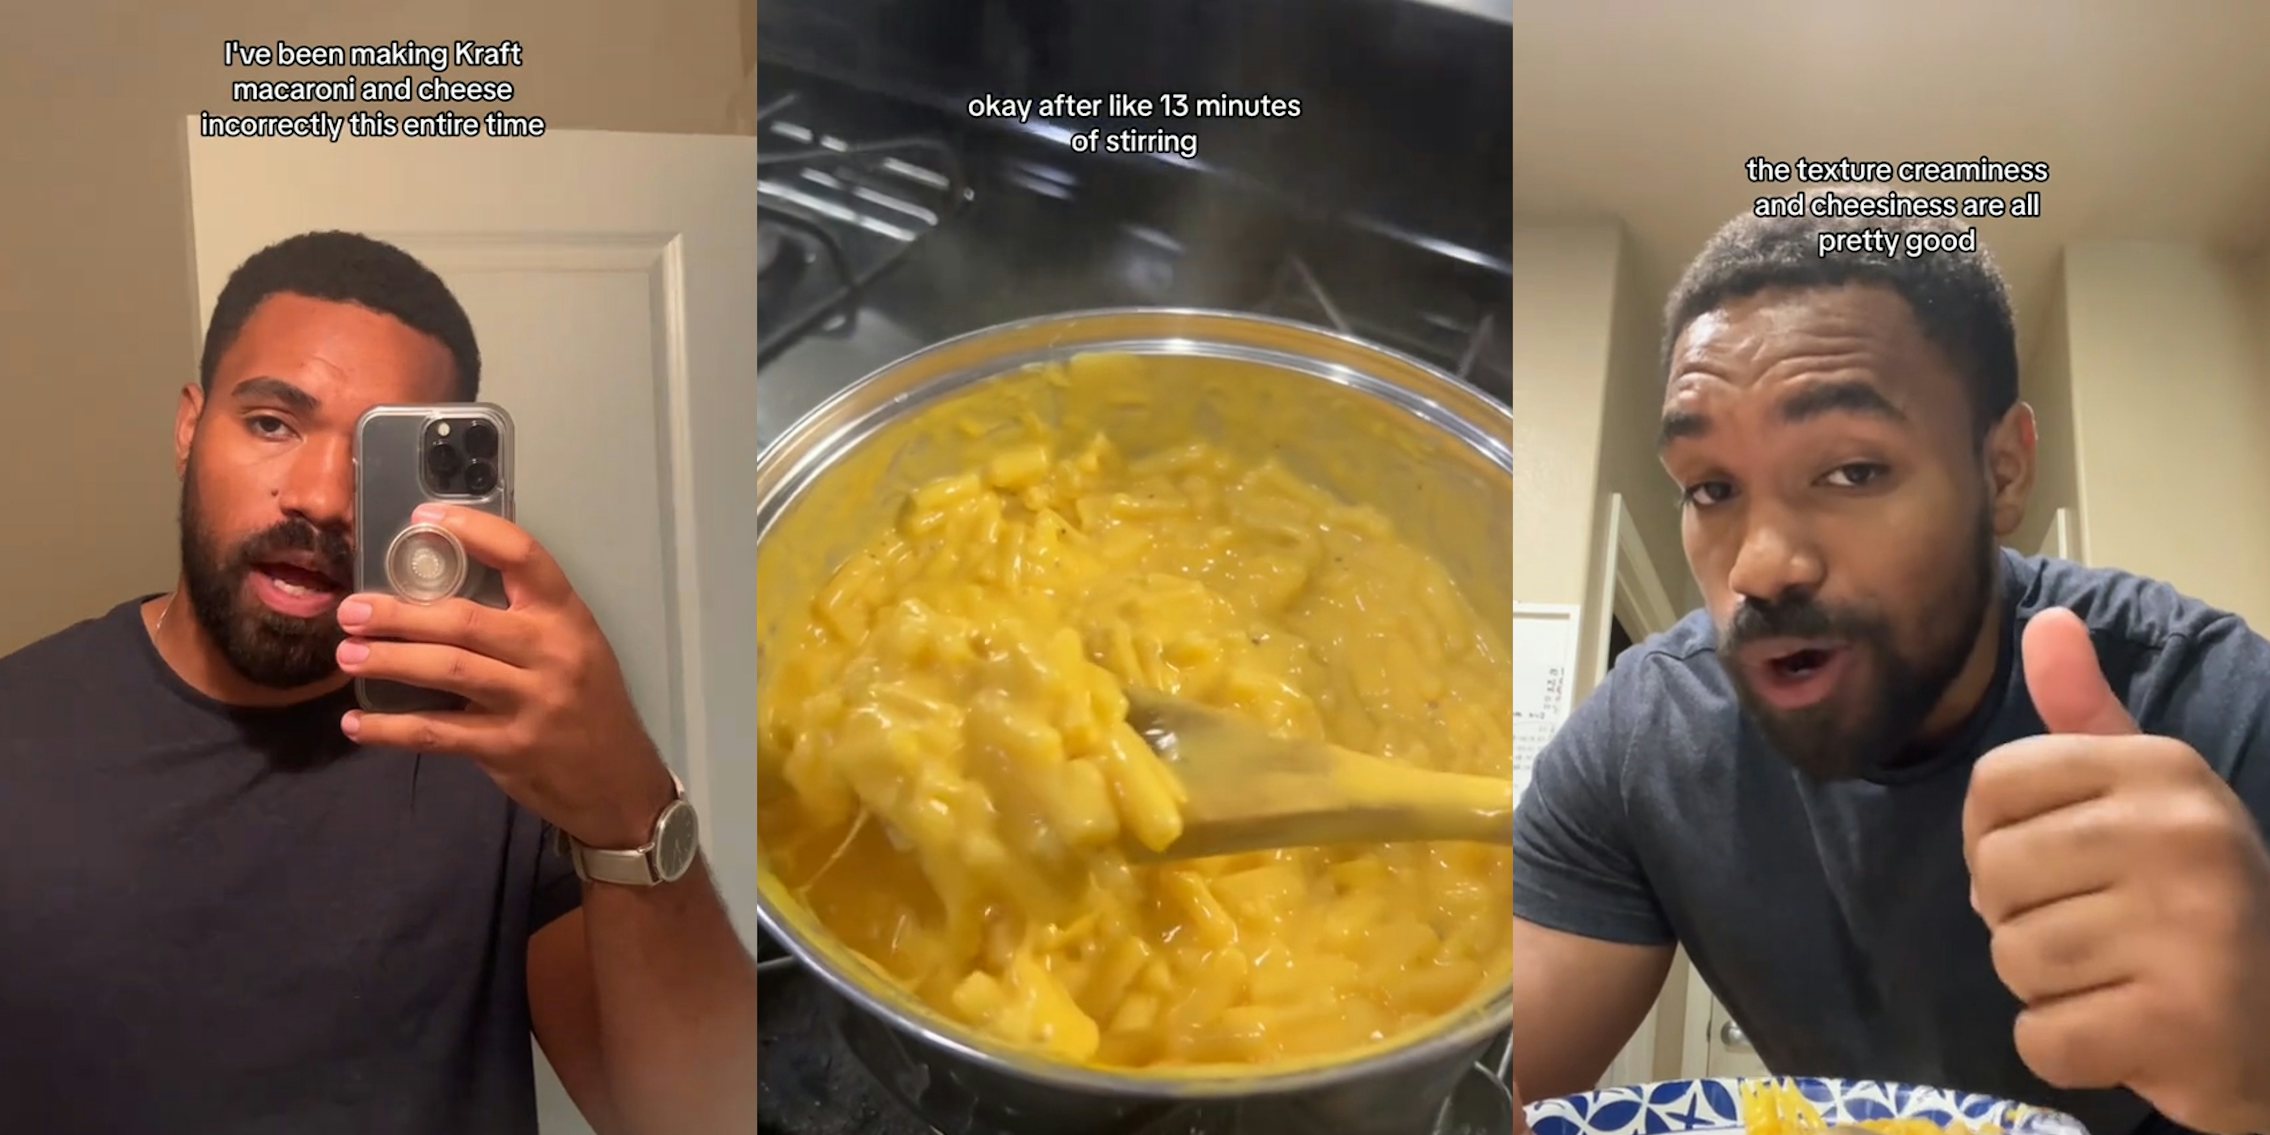 man speaking in bathroom mirror with caption 'I've been making Kraft macaroni and cheese incorrectly this entire time' (l) Kraft mac and cheese in pot on stove with caption 'okay after like 13 minutes of stirring' (c) man speaking with plate of Kraft mac and cheese with thumbs up with caption 'the texture creaminess and cheesiness are all pretty good' (r)